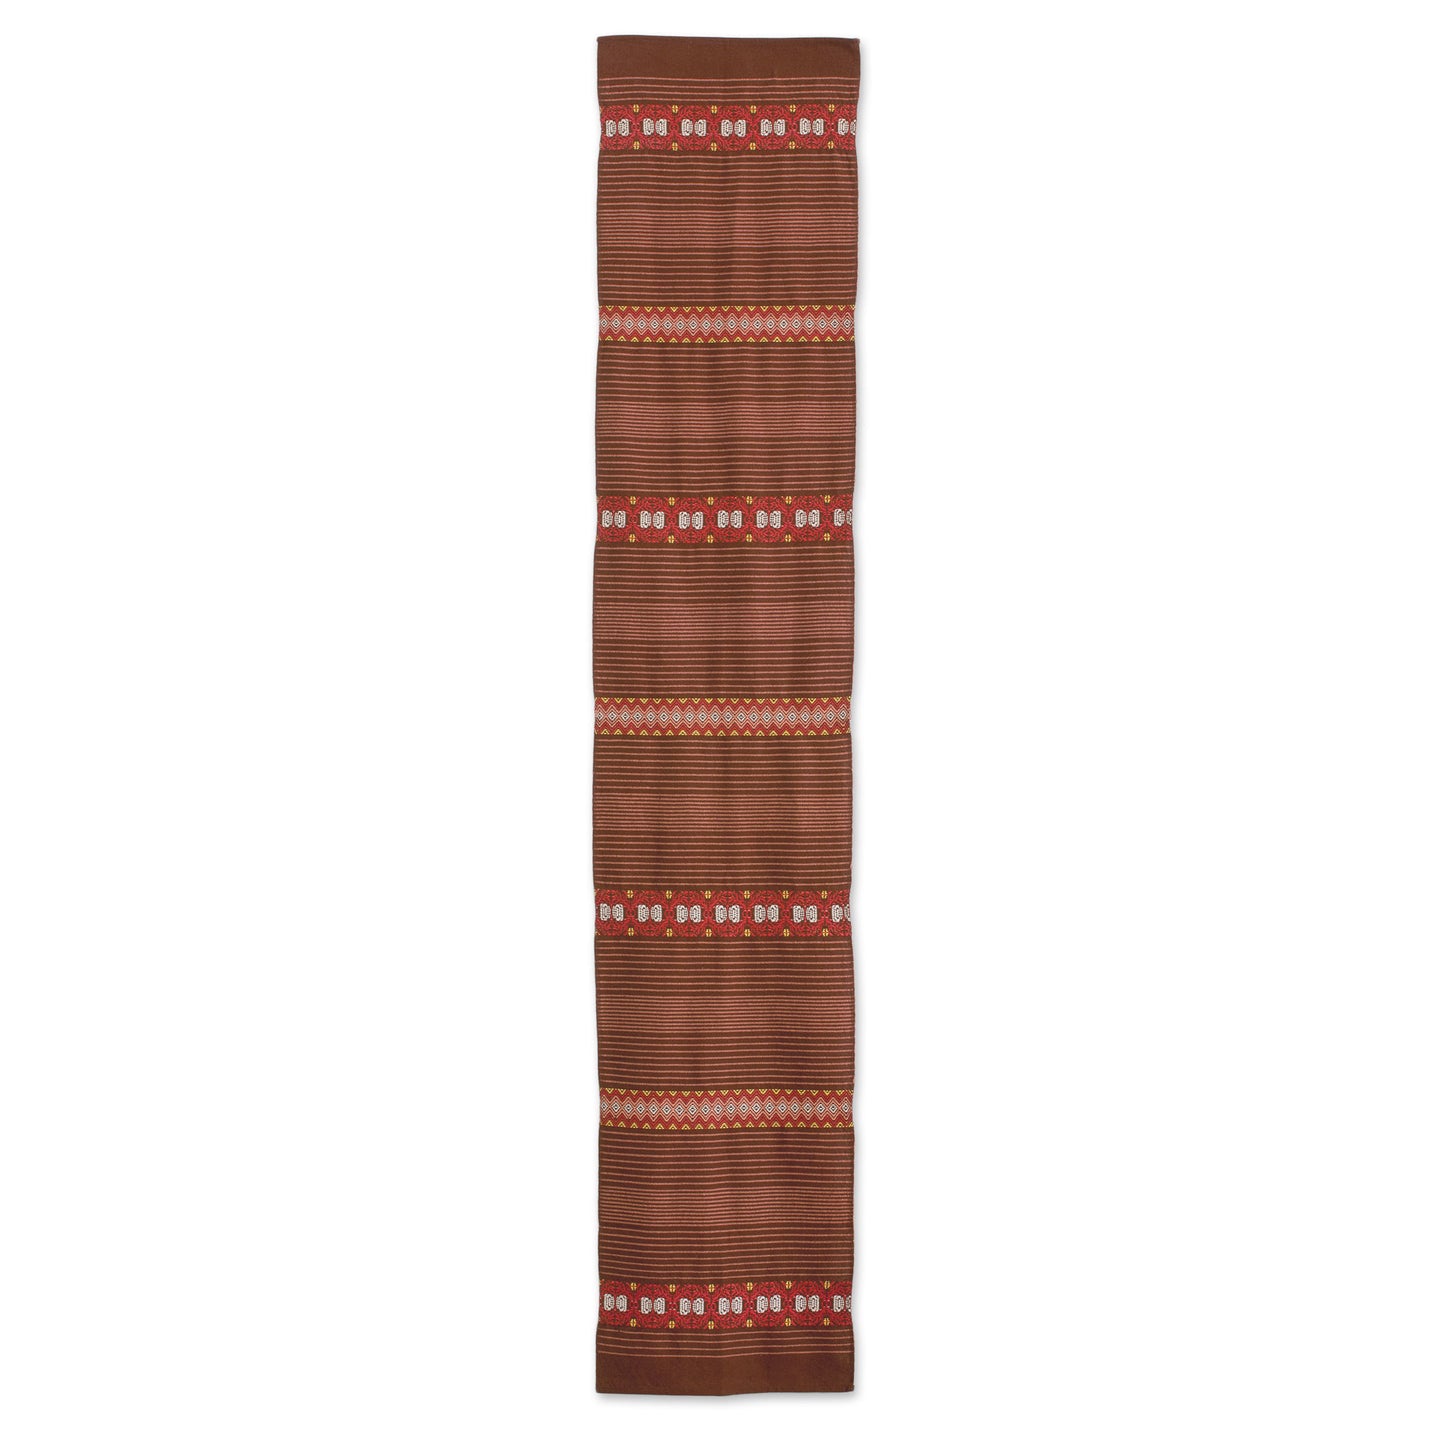 Striped Paths in Chestnut Striped Cotton Table Runner in Chestnut from Guatemala